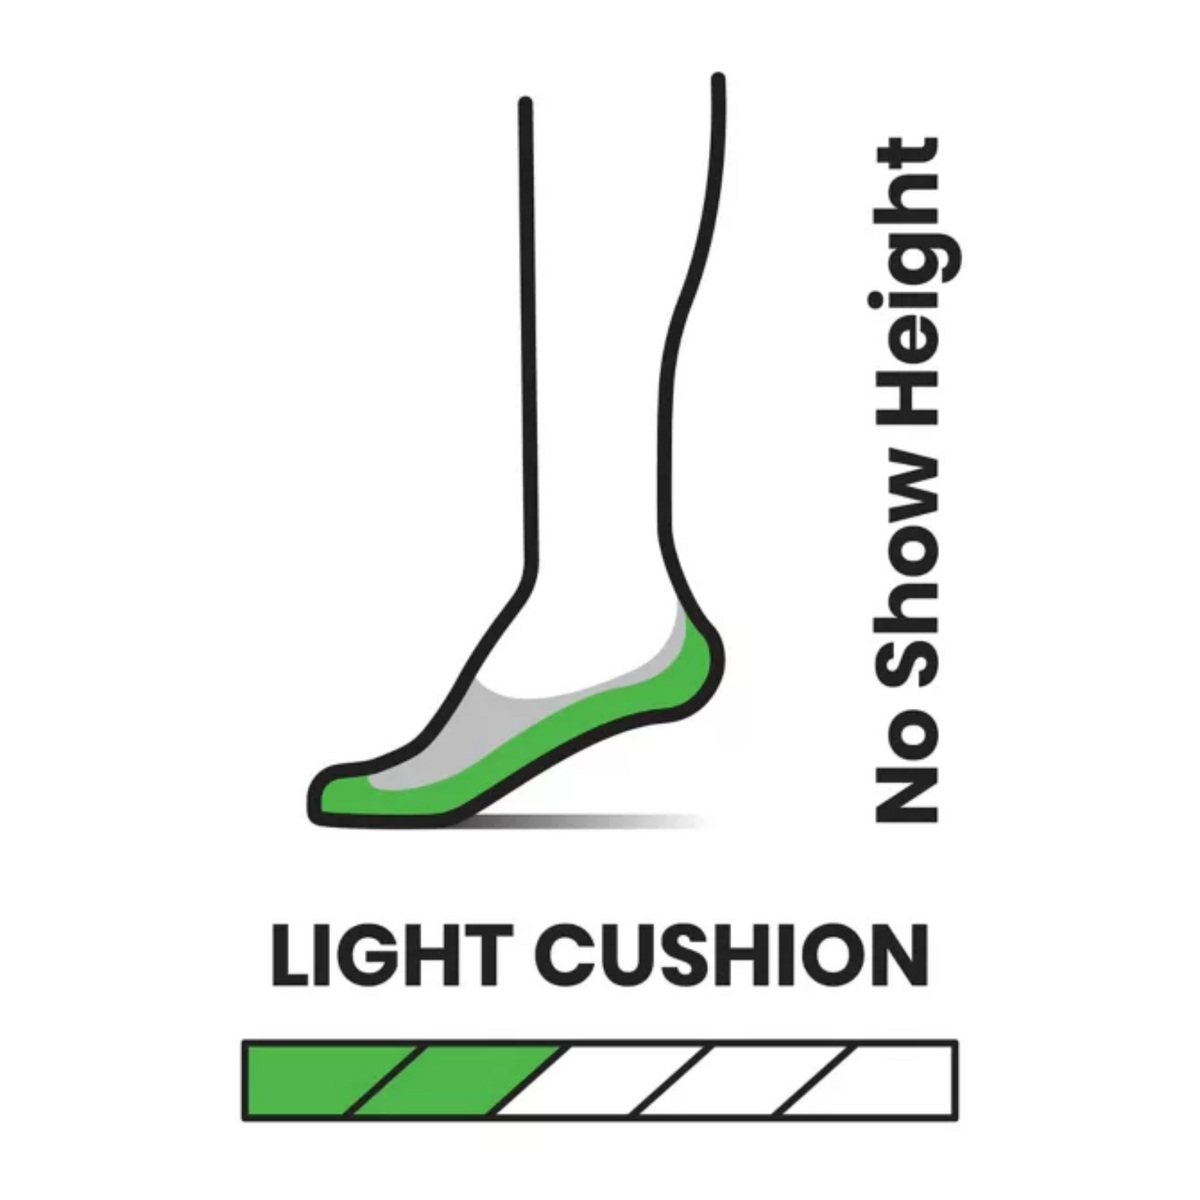 Smartwool Everyday No Show with Light Cushion women&#39;s sock information graphic showing height and cushion amount. 